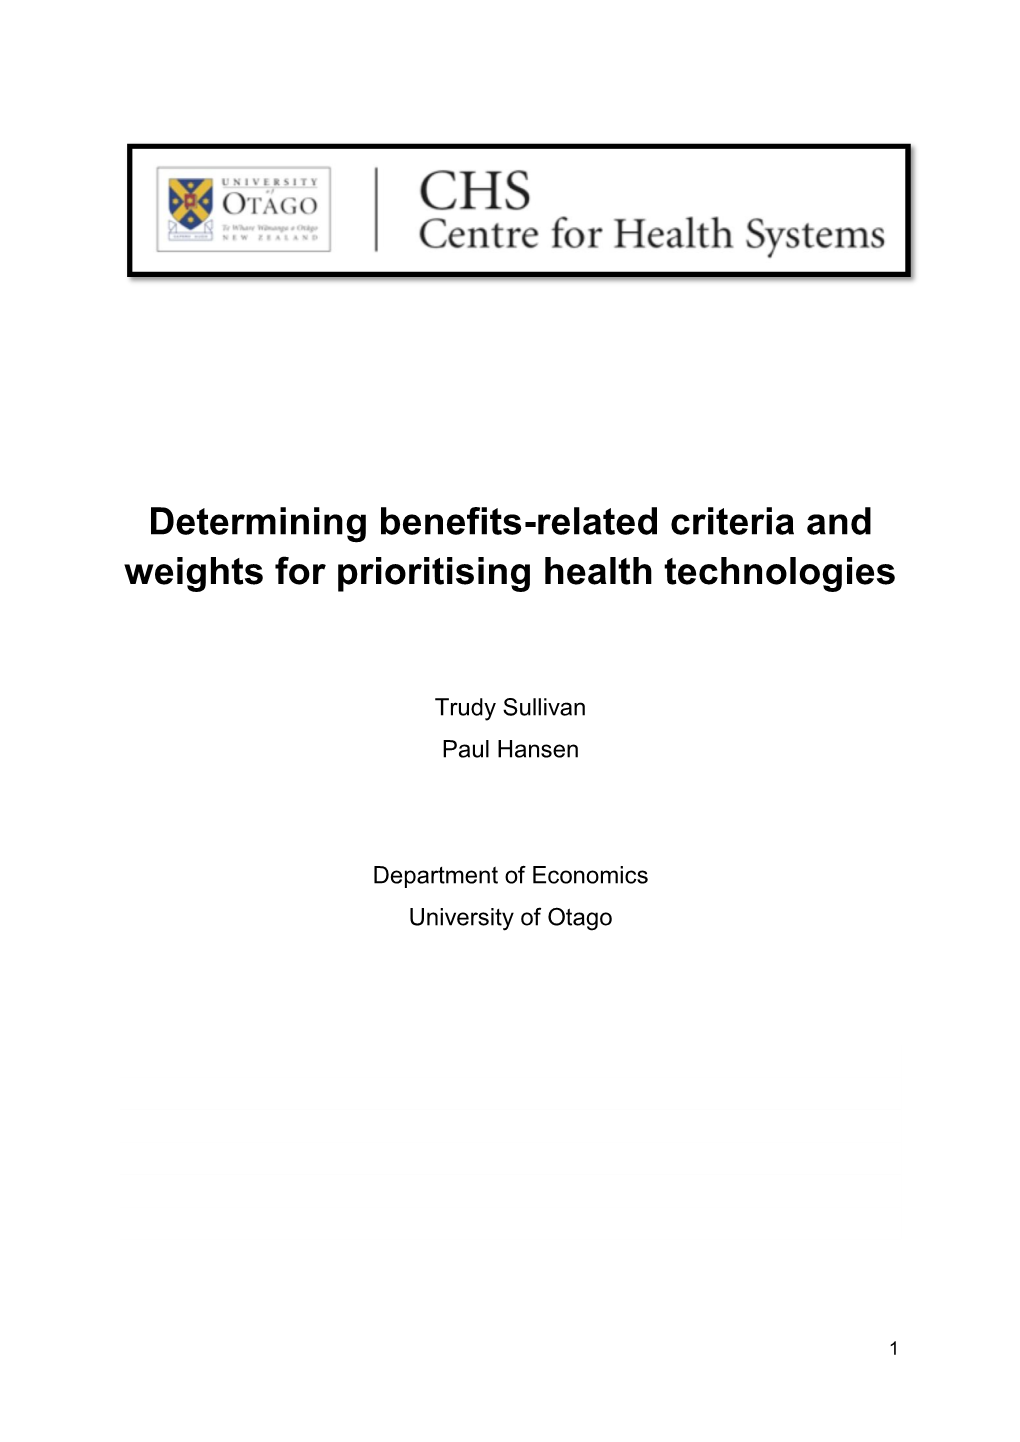 Determining Benefits-Related Criteria and Weights for Prioritising Health Technologies